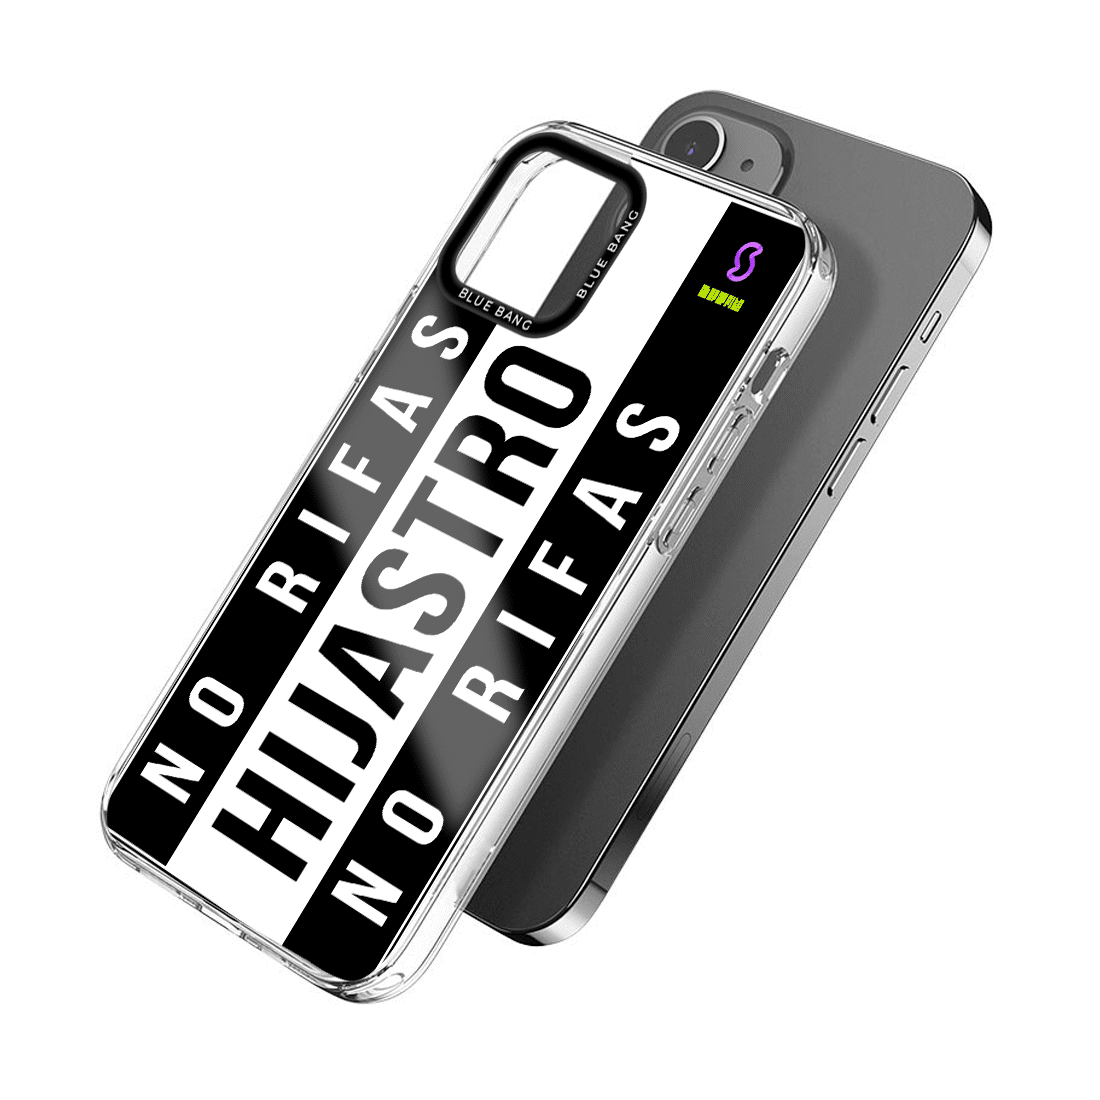 Holographic cell phone case no raffles Chaparrito